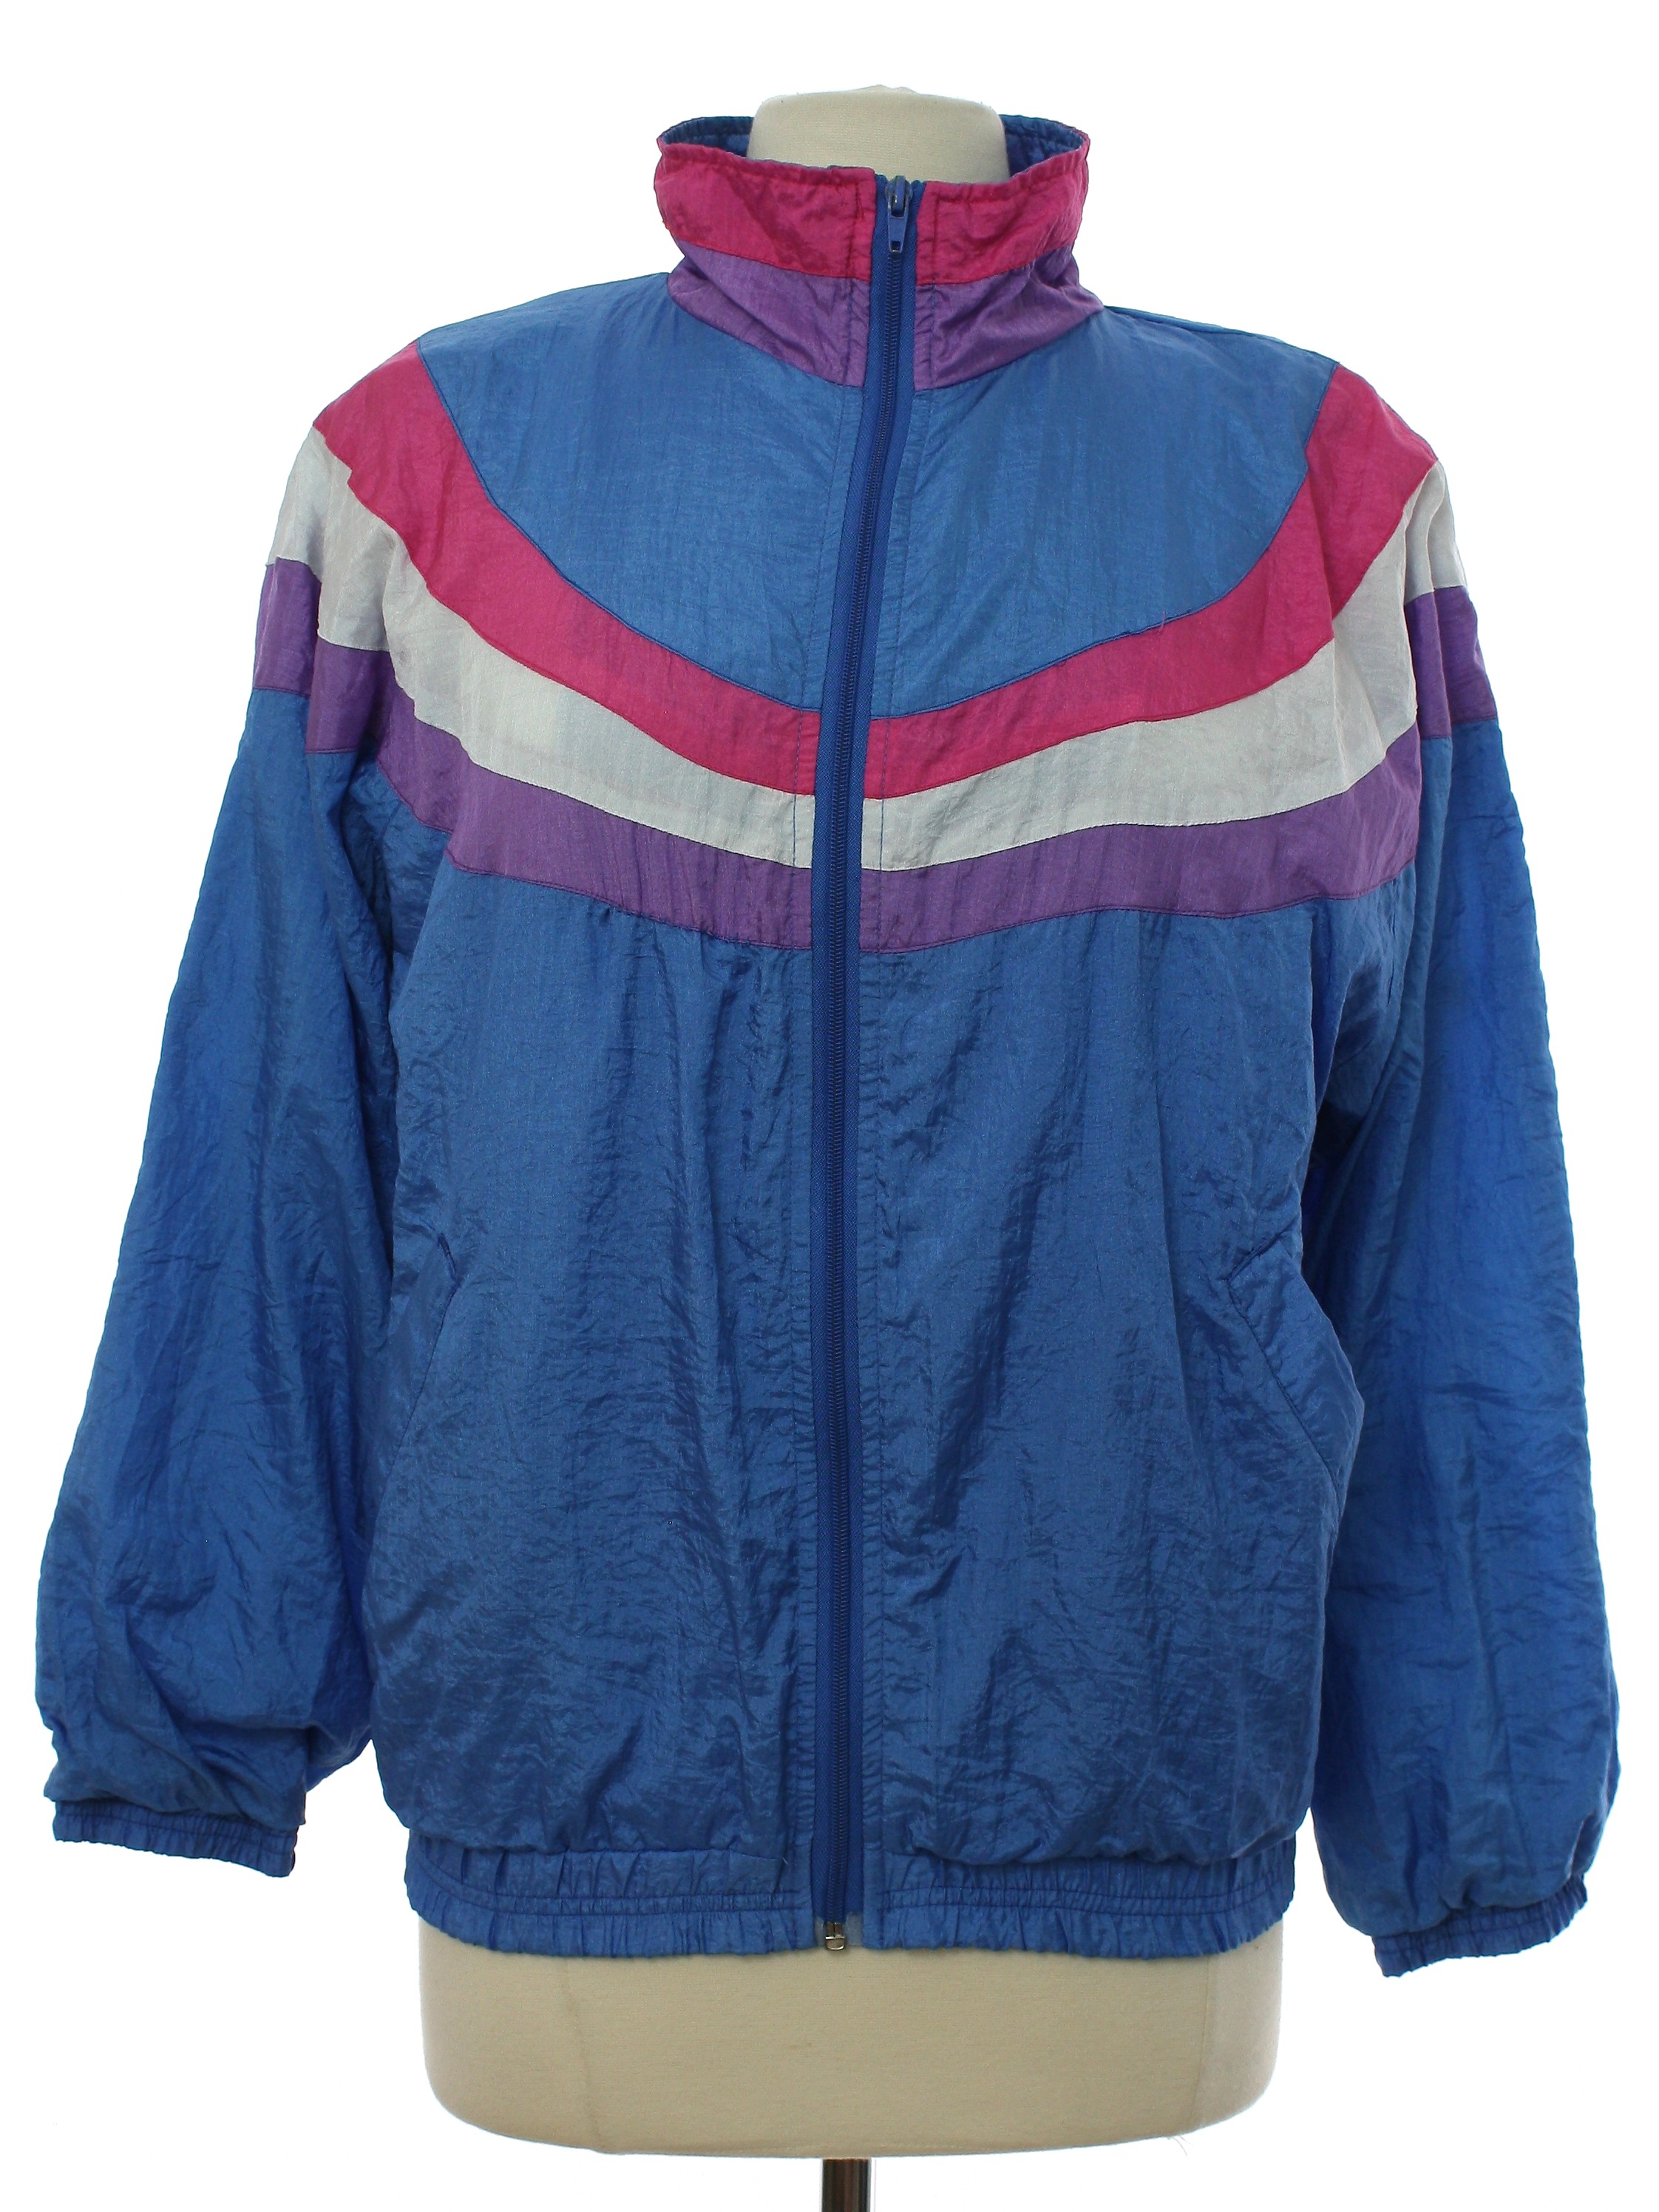 Pro Spirit 80's Vintage Jacket: 80s -Pro Spirit- Womens light blue  background nylon shell banded elastic cuffs dolman longsleeve zip front  windbreaker zip jacket. Rounded stripes in shades of magenta, white, and